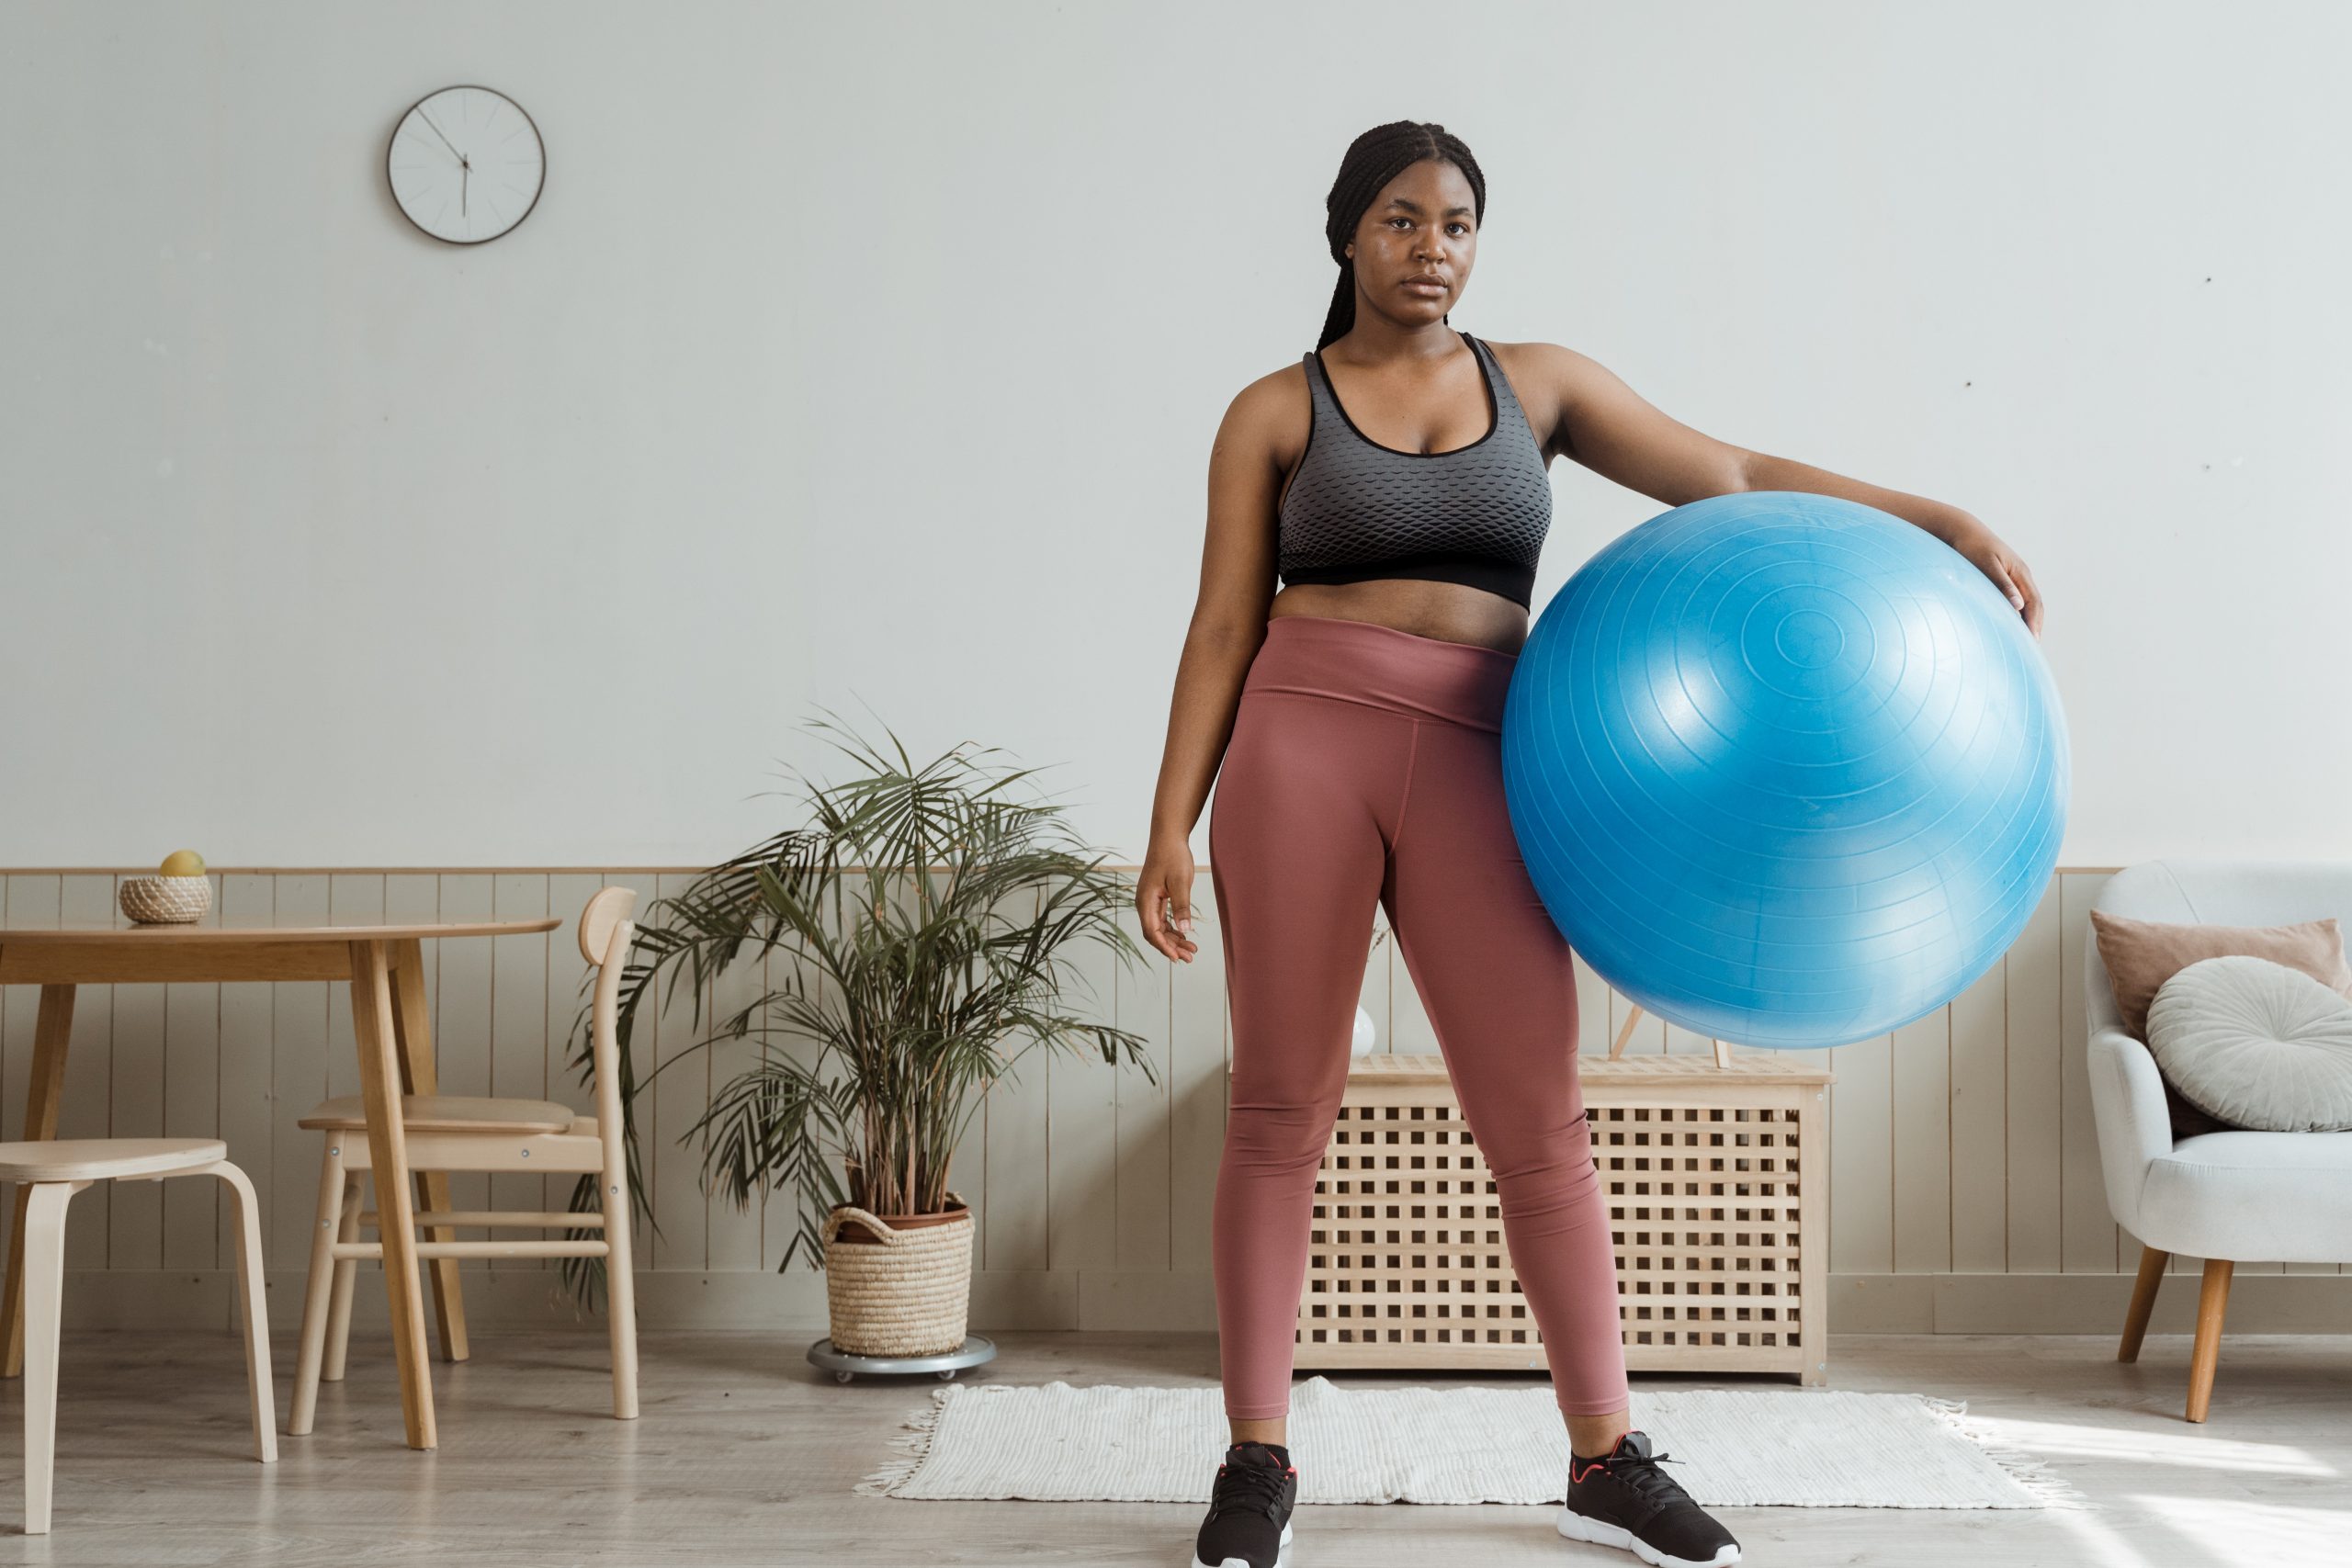 Holding a blue gym ball, a young black woman prepares to train in her living room.